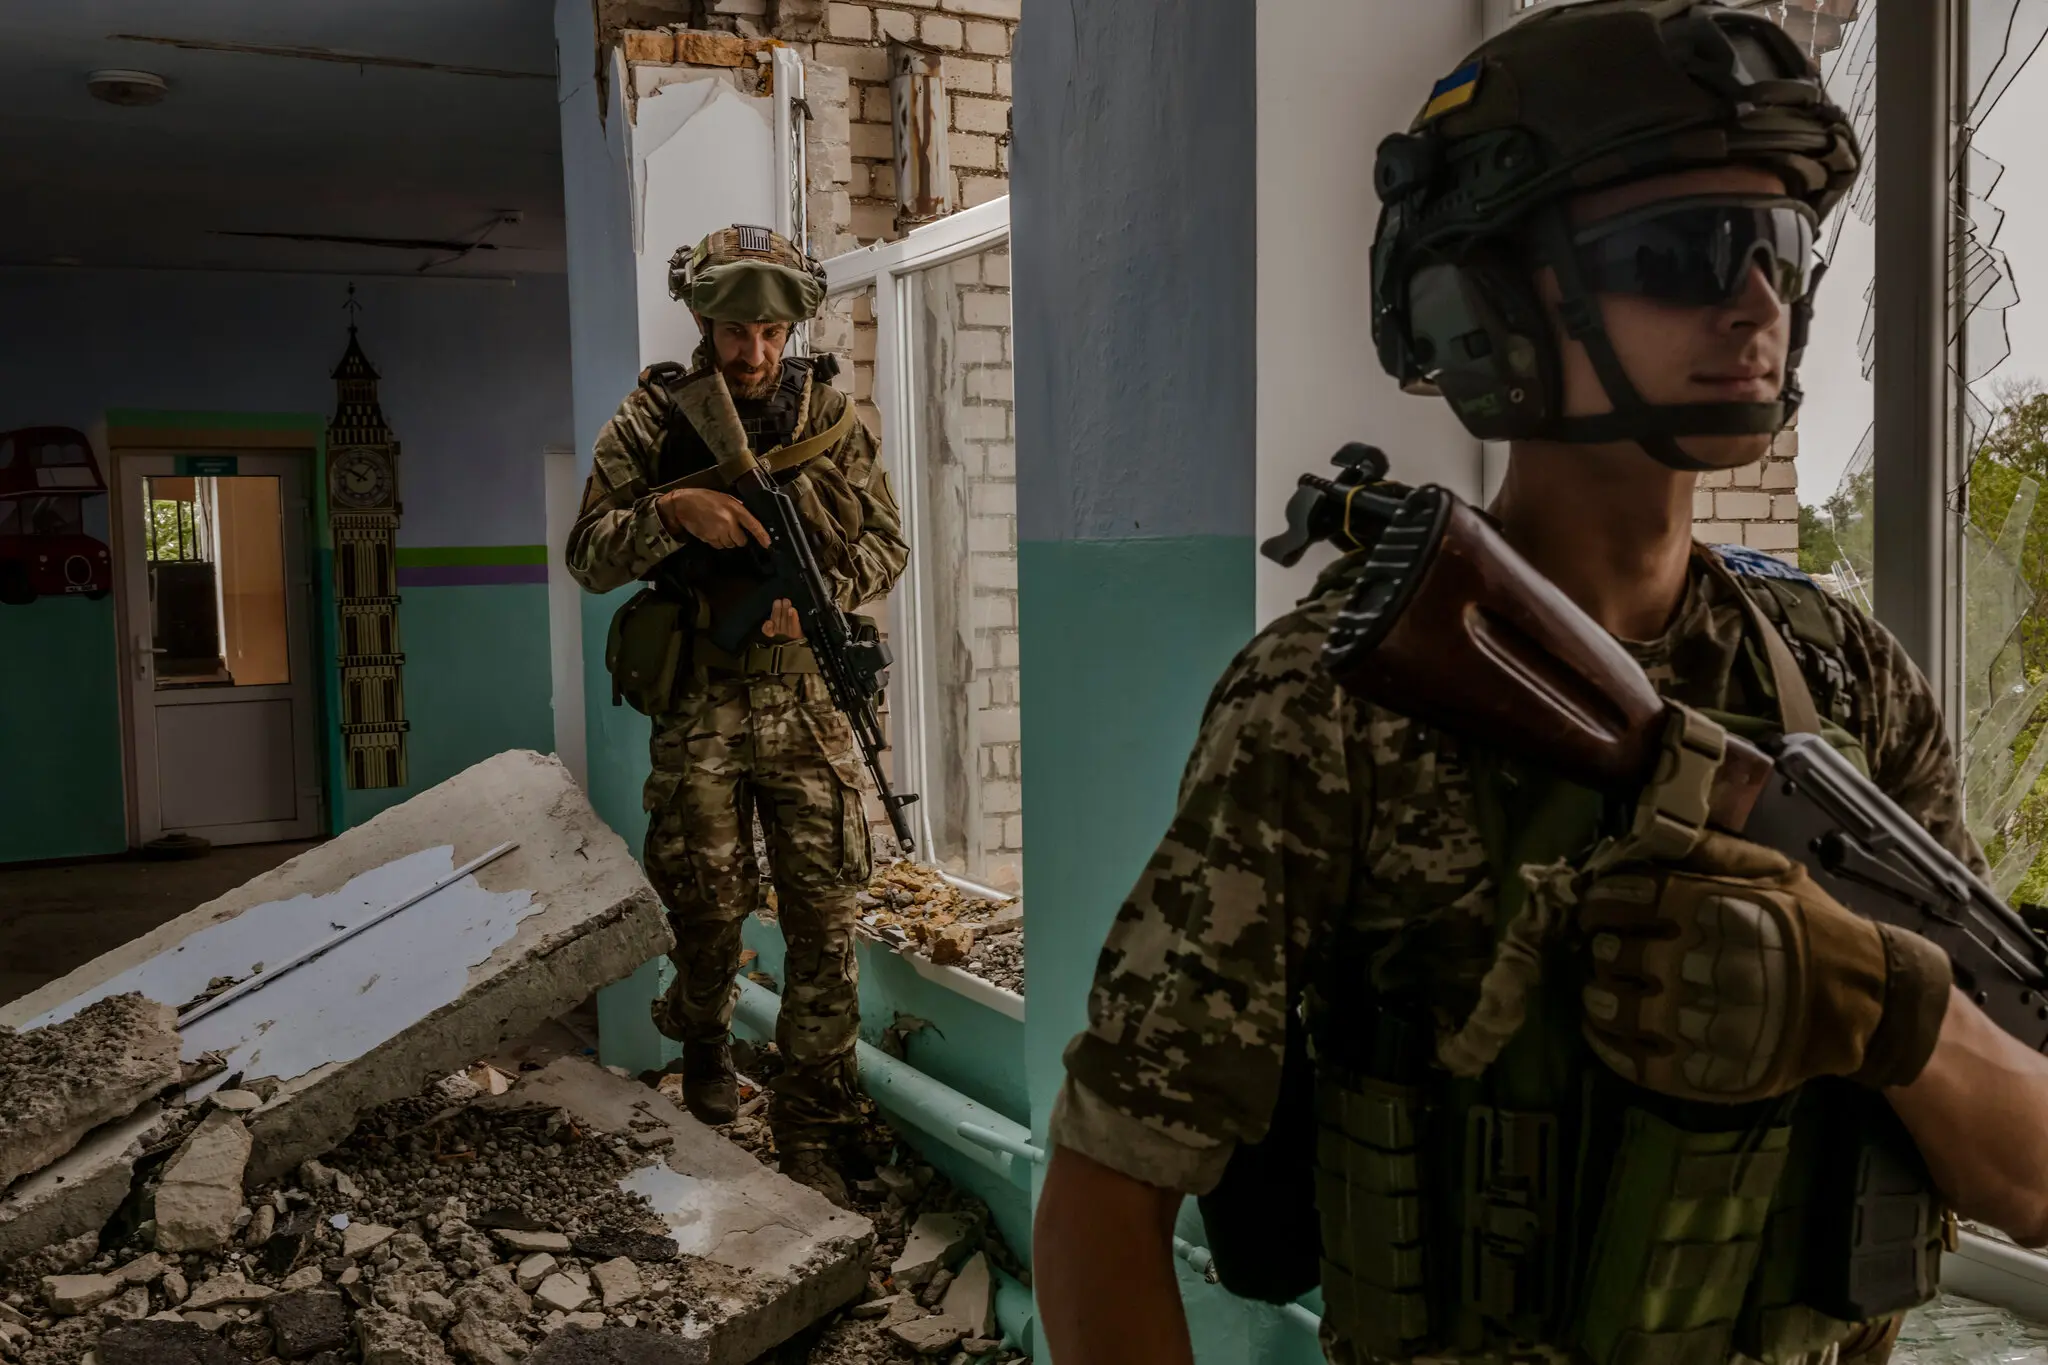 Ukrainian servicemen walking through a school bombed by Russian forces at the front line in the Mykolaiv region on Aug. 11. Daniel Berehulak for The New York Times.